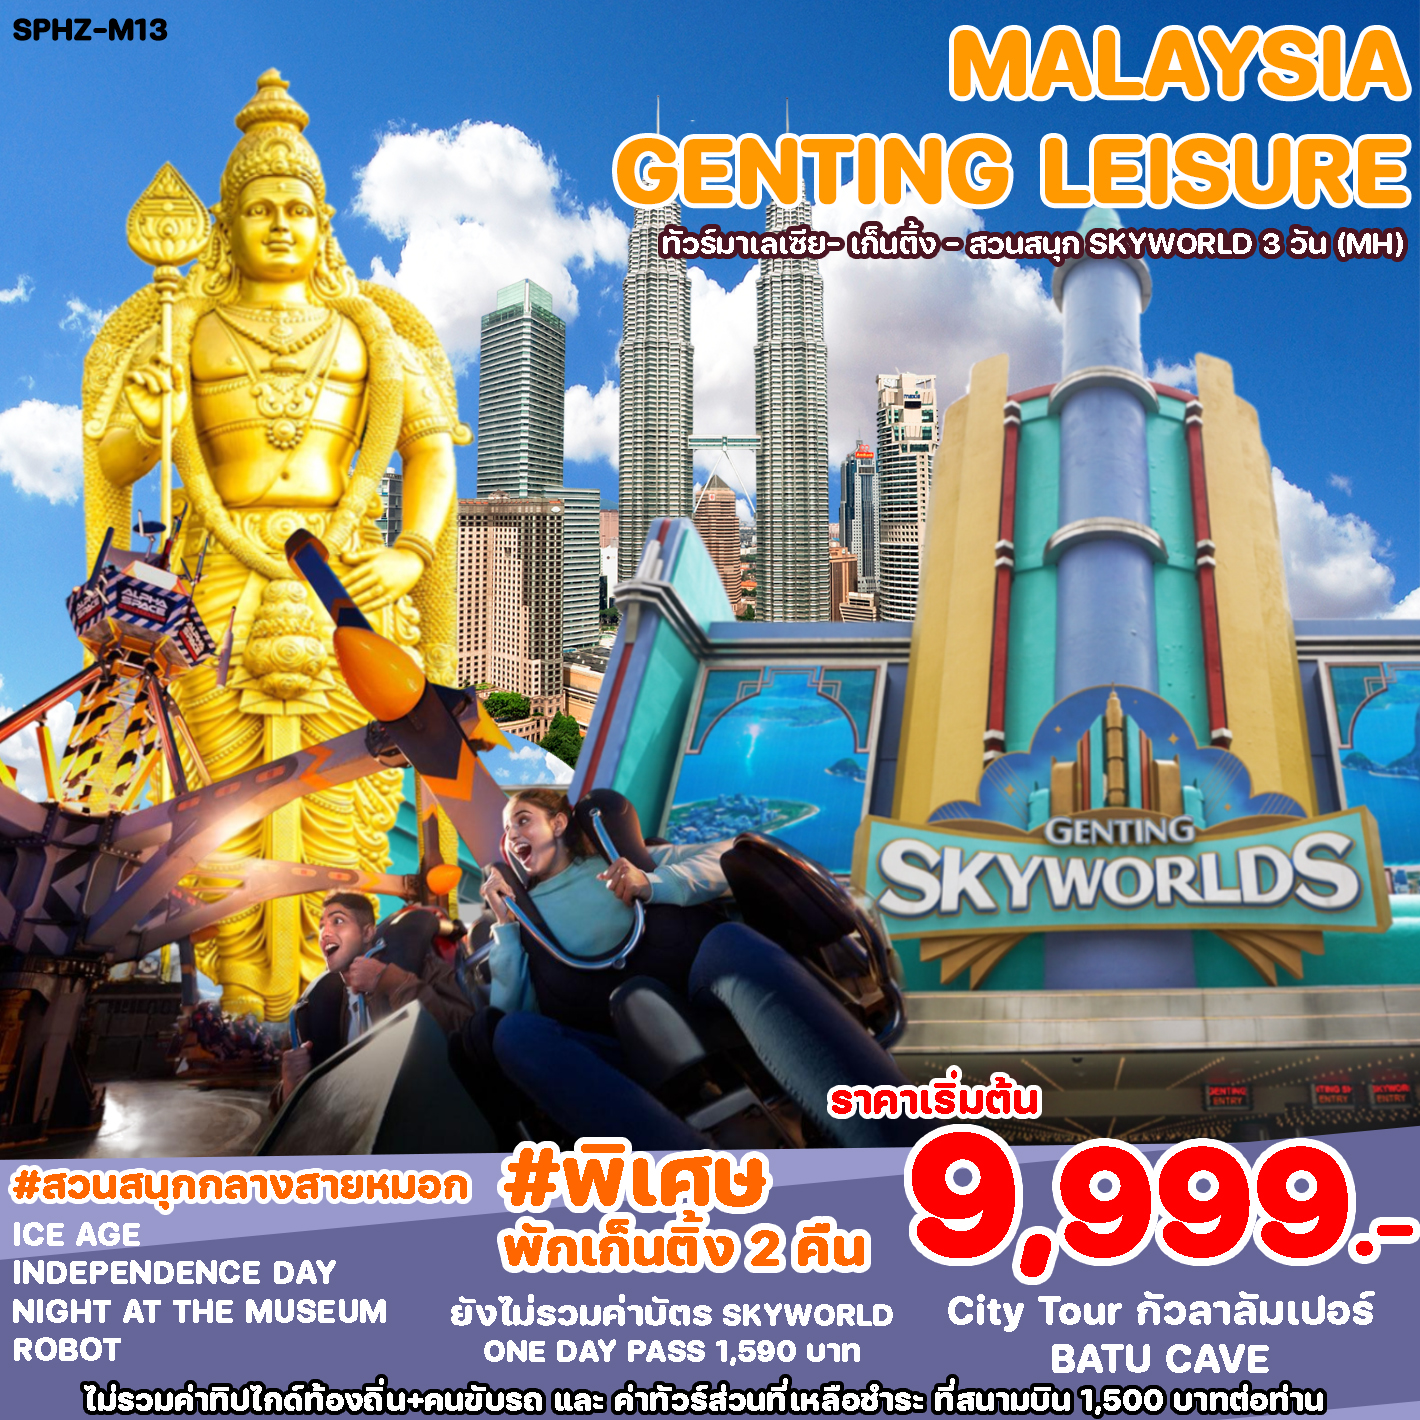 SPHZ-M15 MALAYSIA GENTING LEISURE 3D2N (MH) AUG 24 - MAY 25